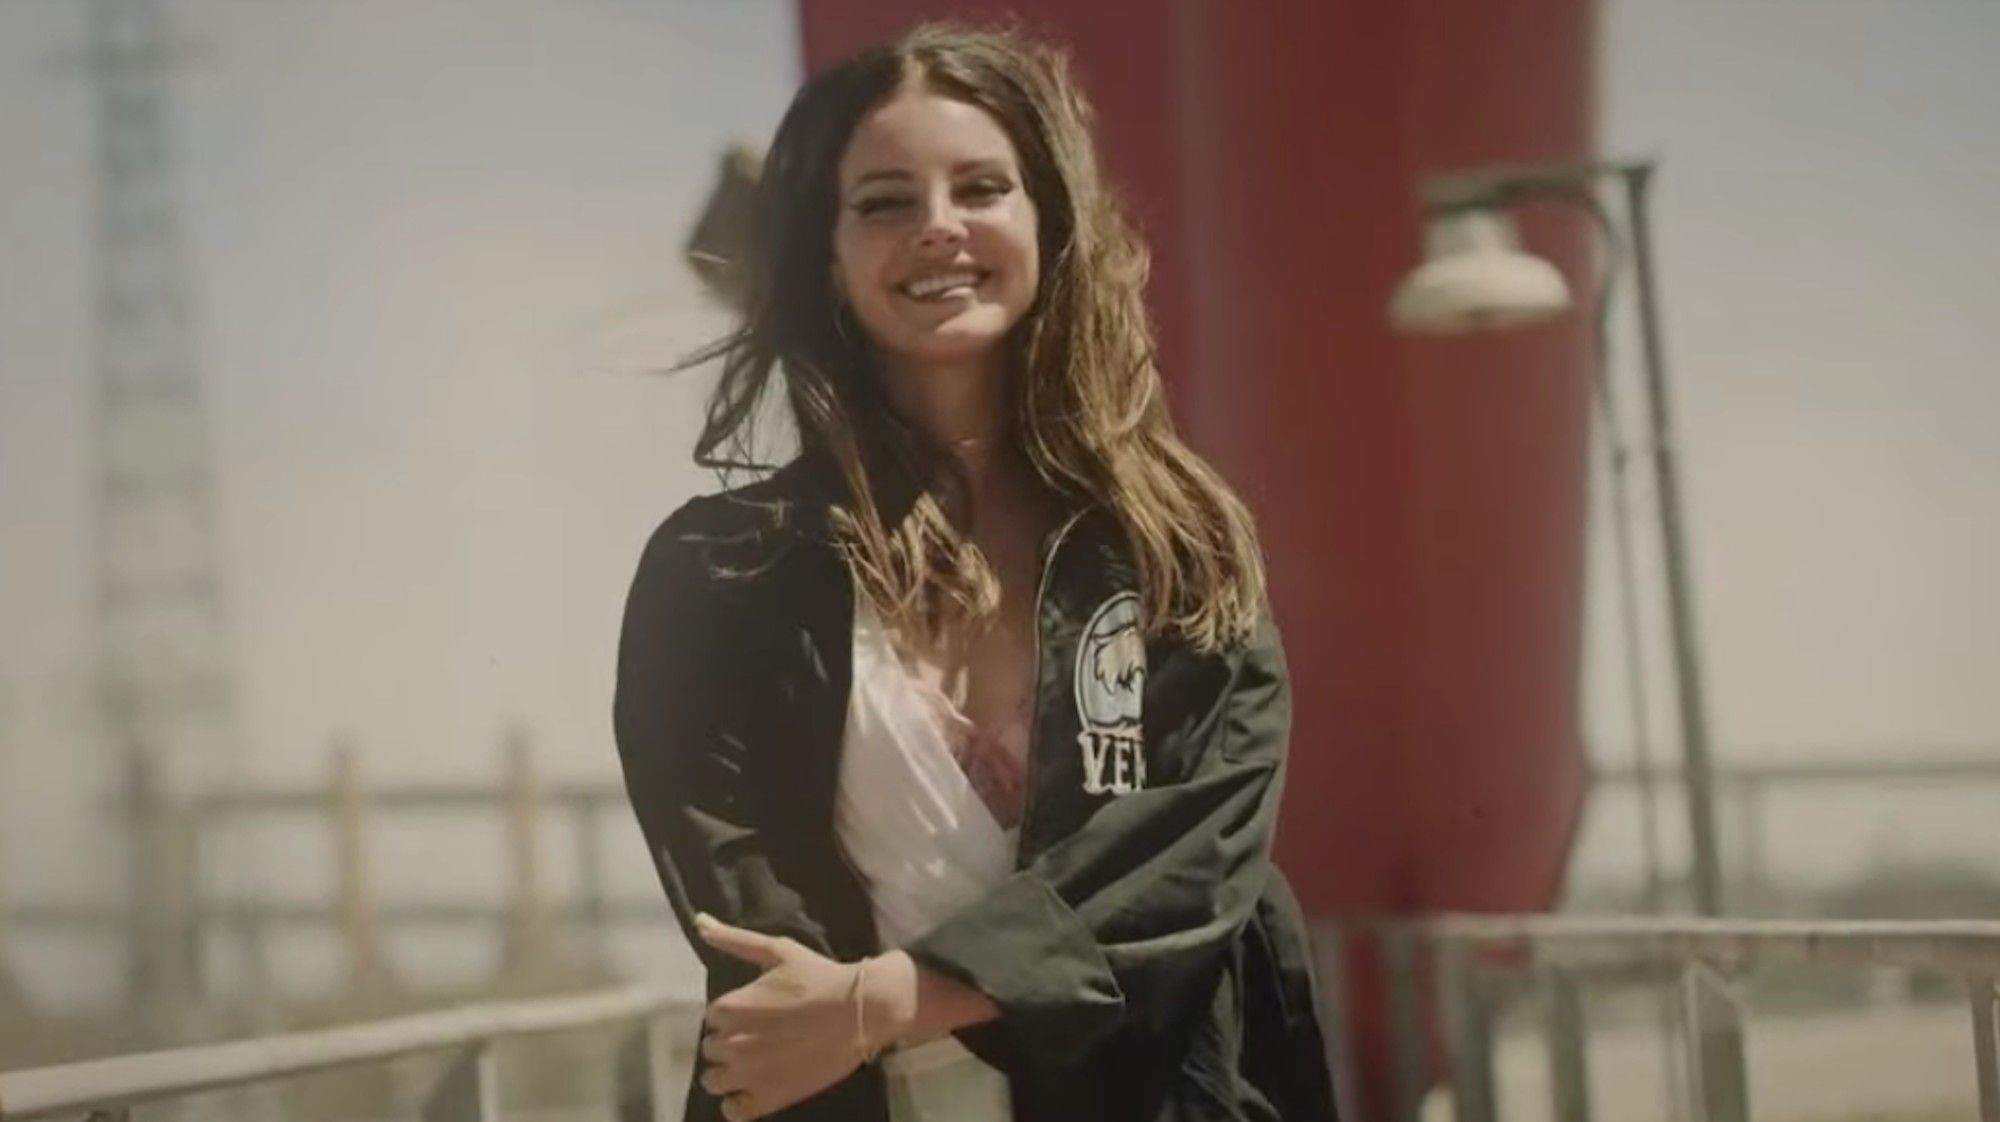 Watch Lana Del Rey's 'Fuck It I Love You' and 'The Greatest' double video